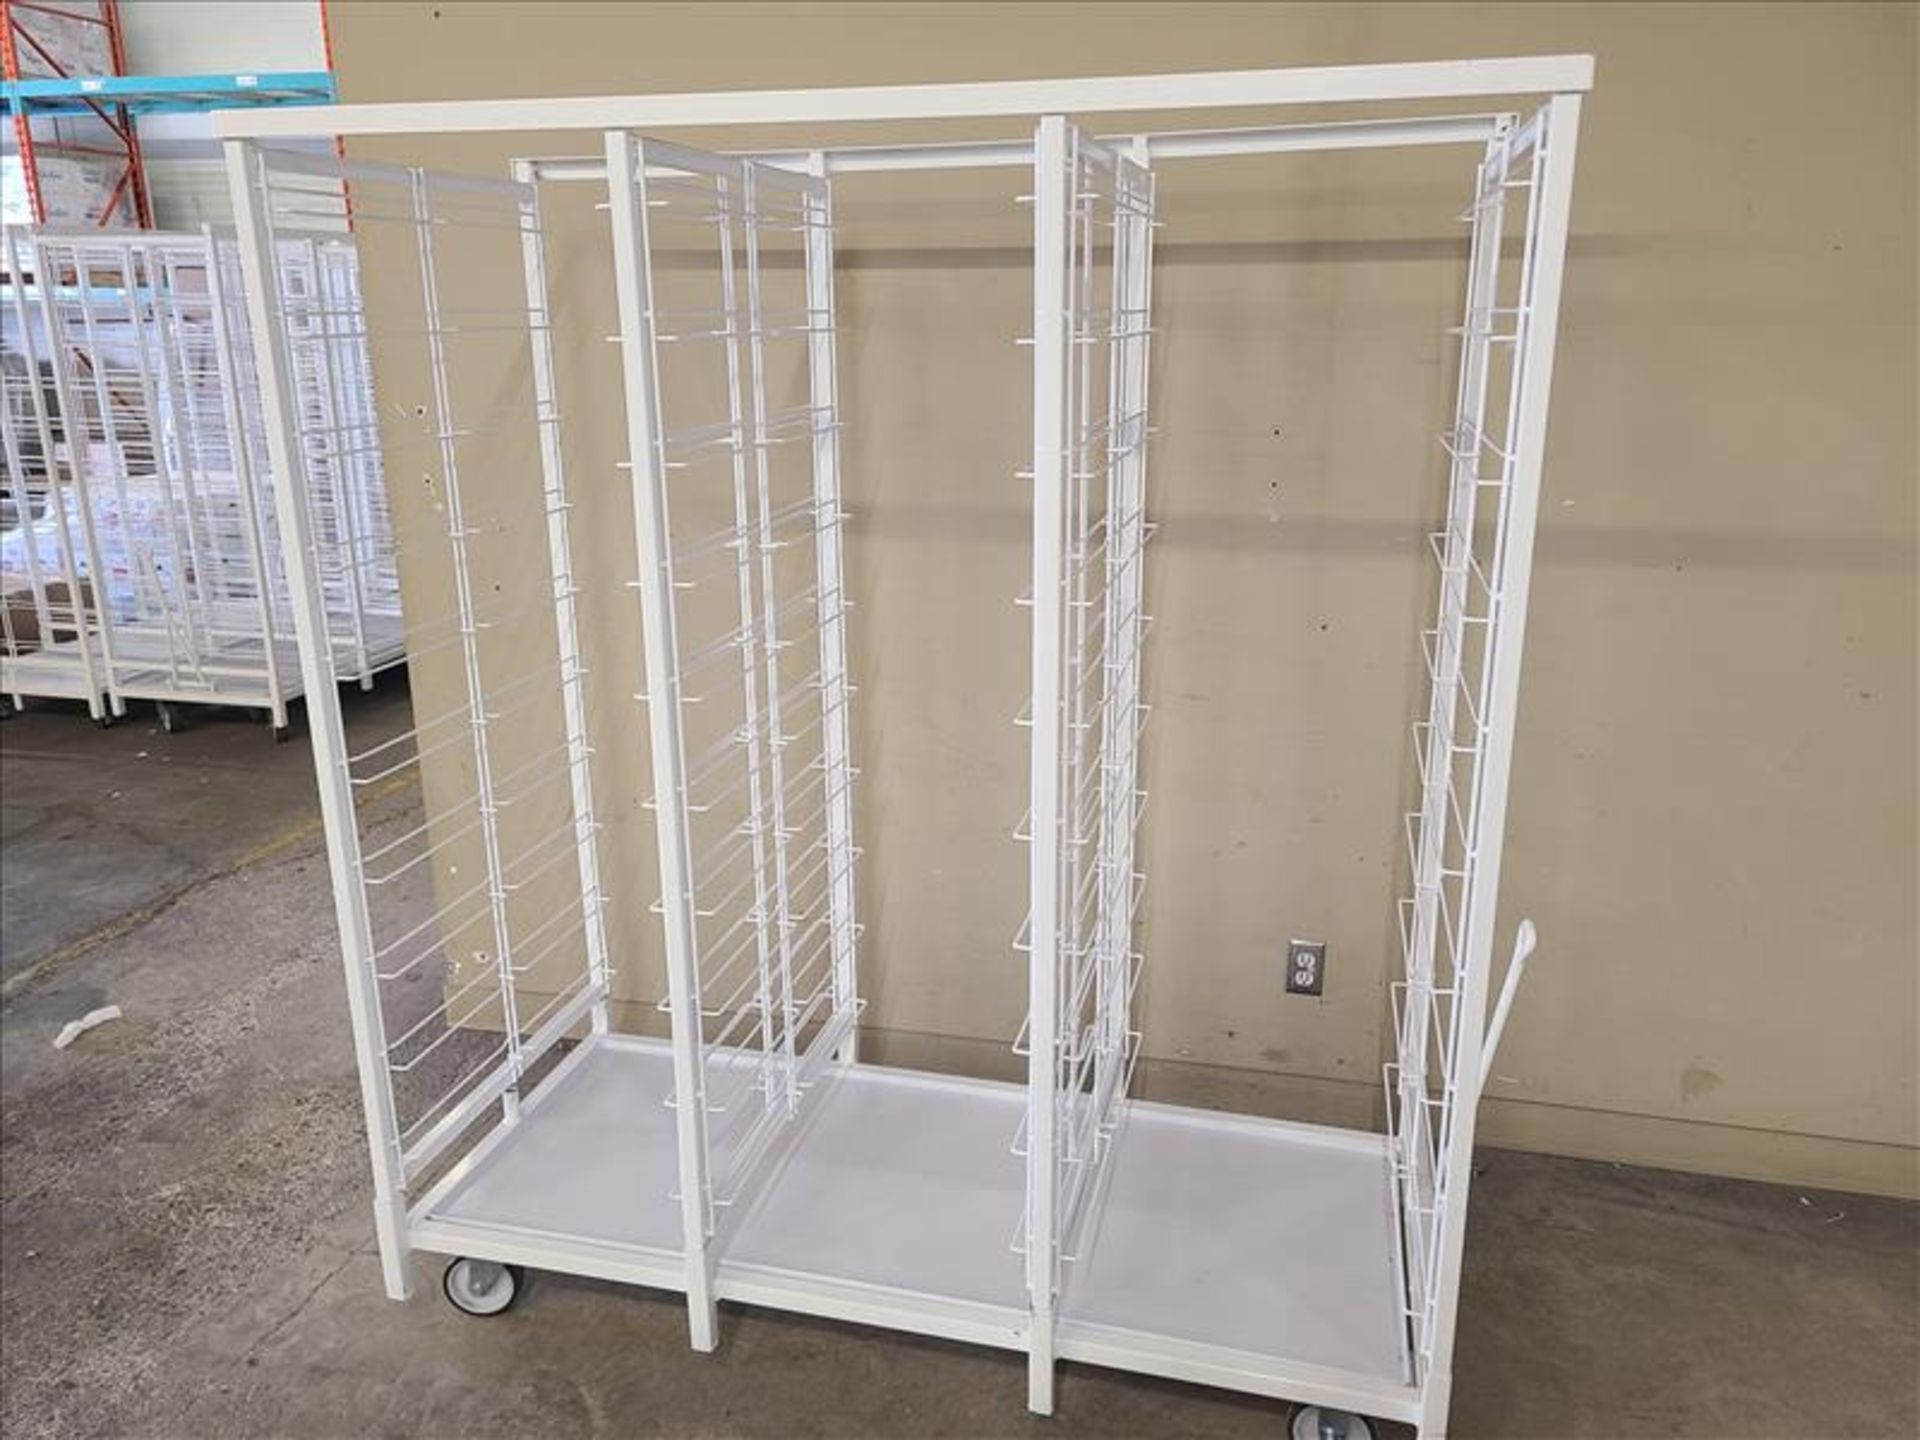 NEW VRE integrated plant production/tray drying racks, mod. DRYMAX30 w/ casters - Image 2 of 2